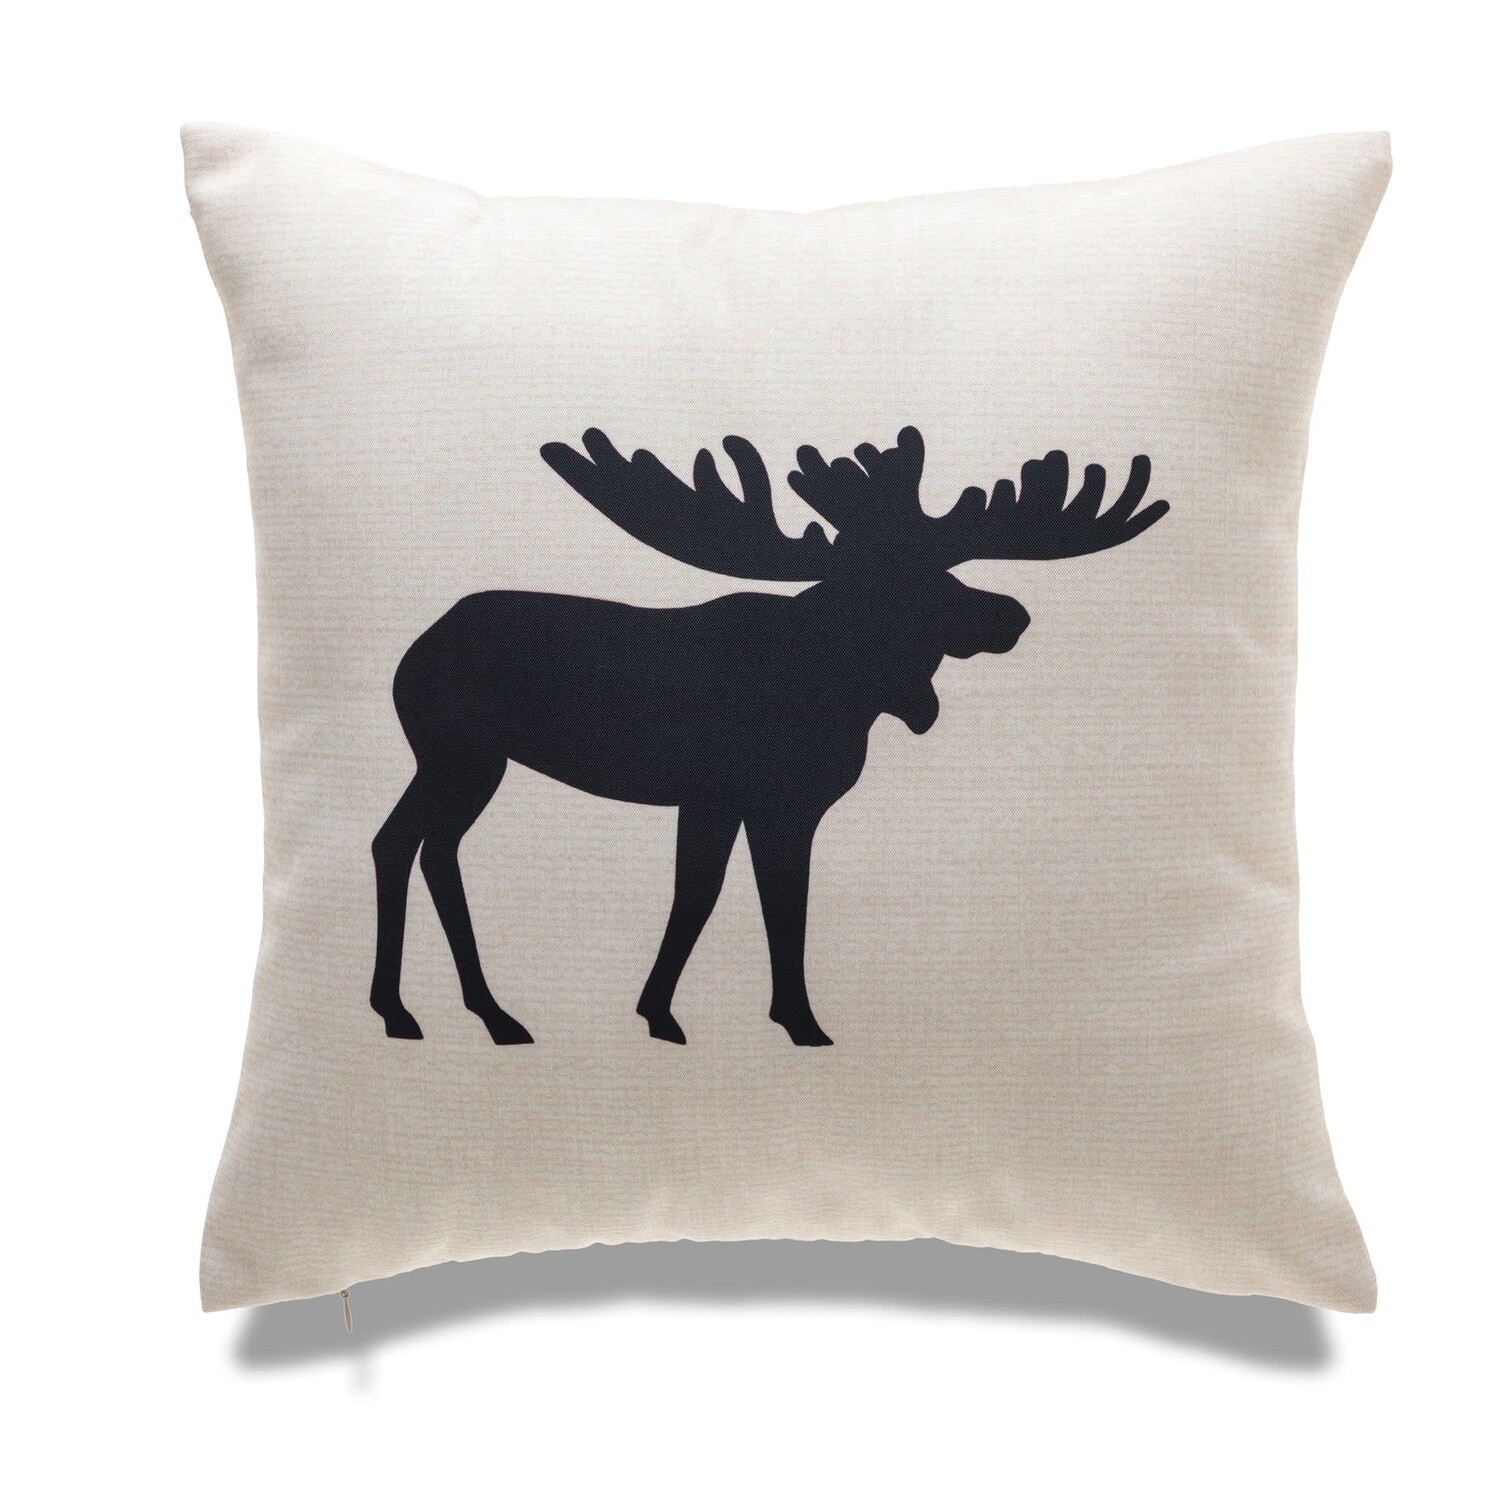 Pillow - Outdoor Cottage Living Black Moose 18x18"